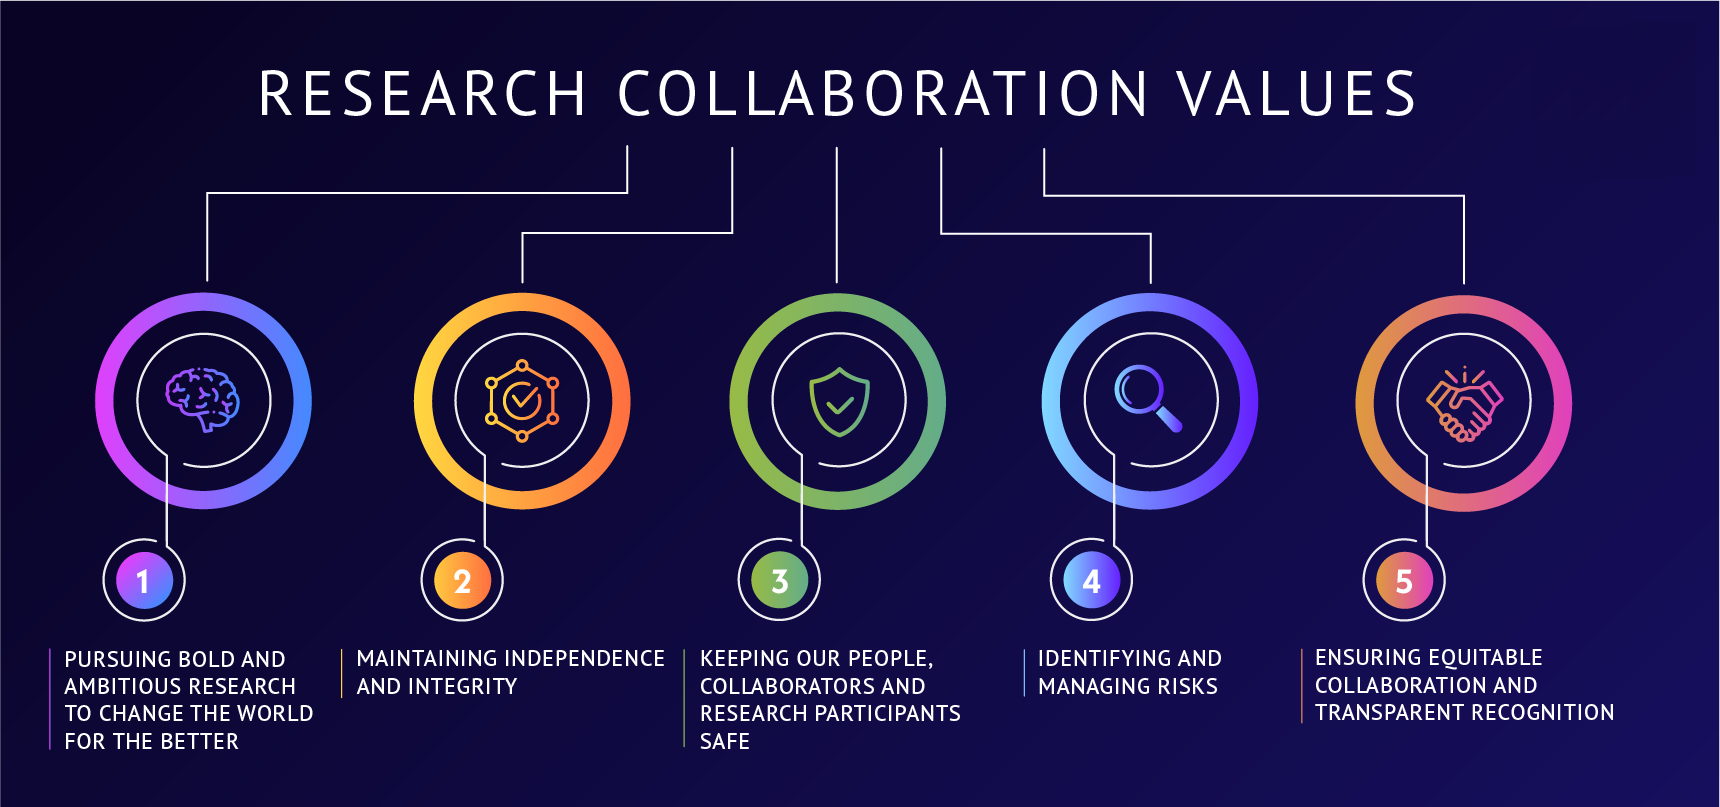 a research collaboration can be enhanced by citi